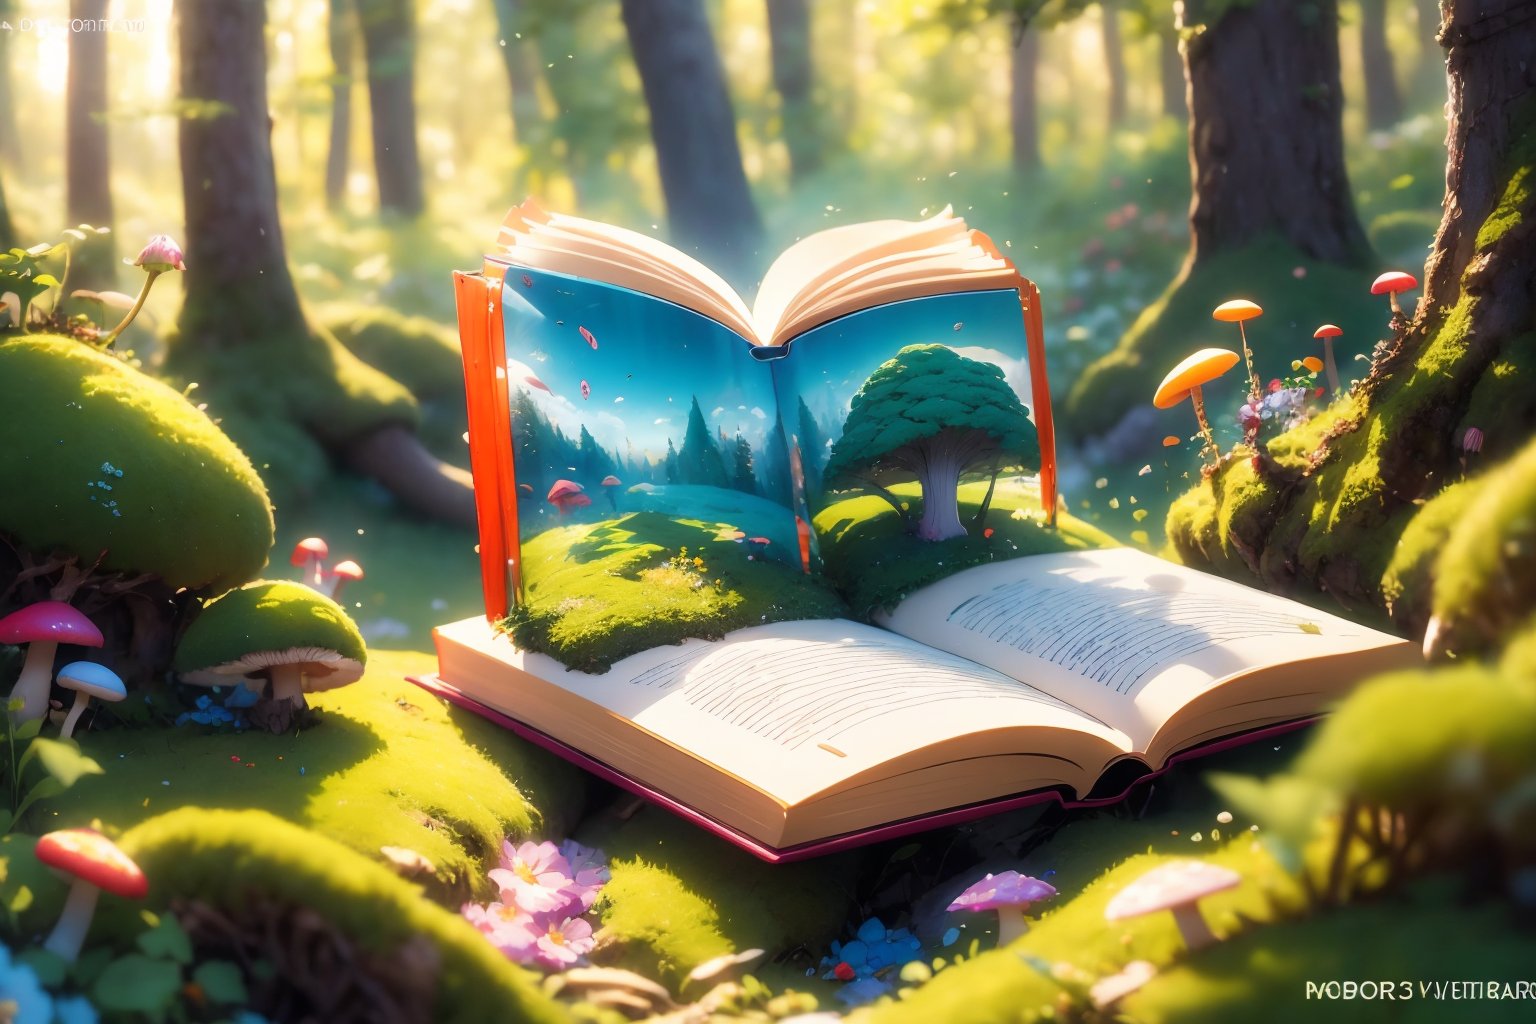 flower,outdoors,day,artist name,blurry,tree,book,no humans,depth of field,watermark,grass,nature,scenery,forest,open book,mushroom,moss,<lora:EMS-304972-EMS:0.800000>